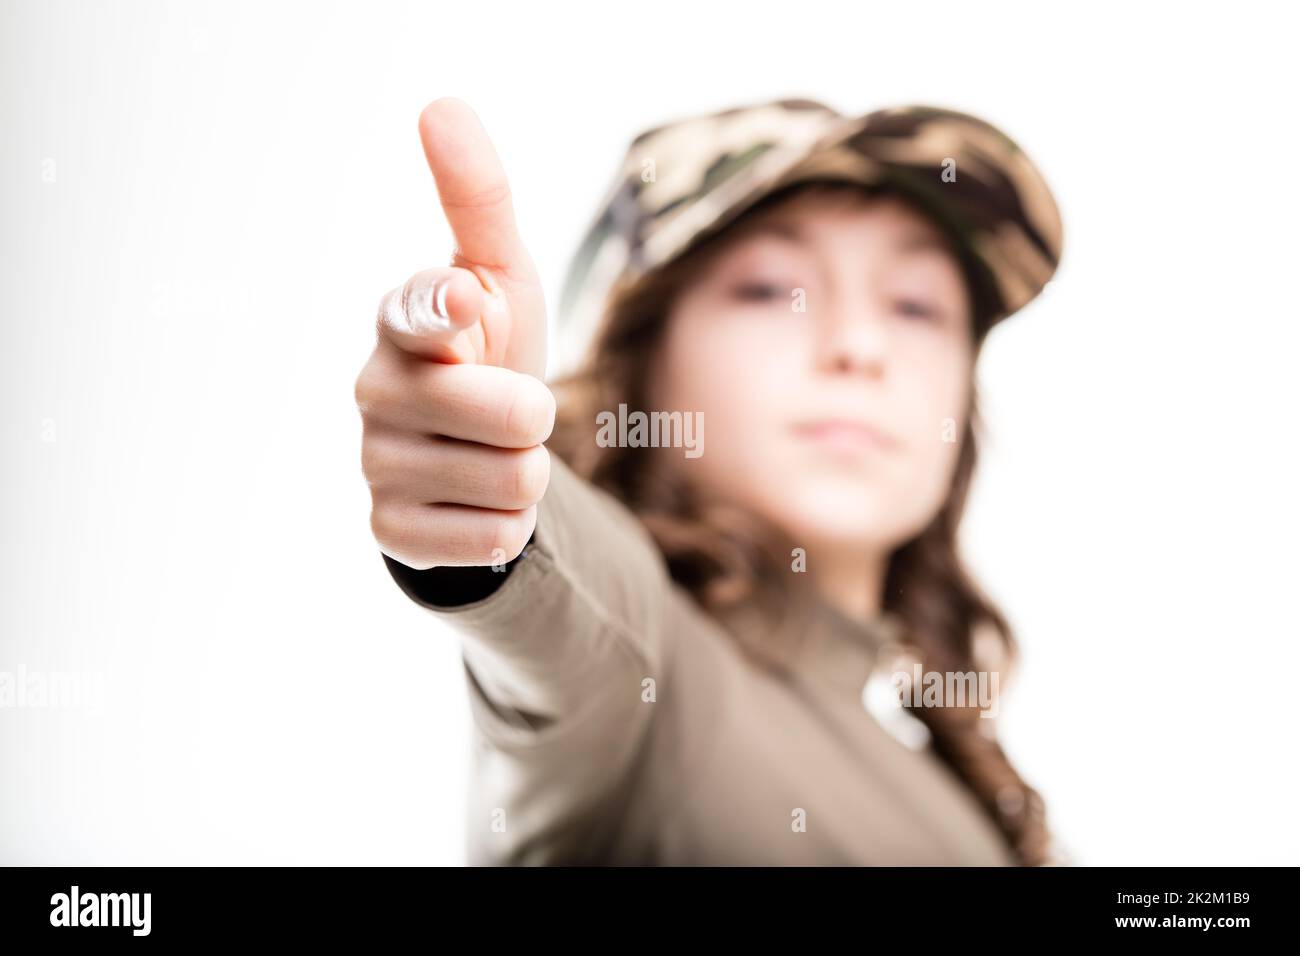 little girl imitating a gun with her hand Stock Photo